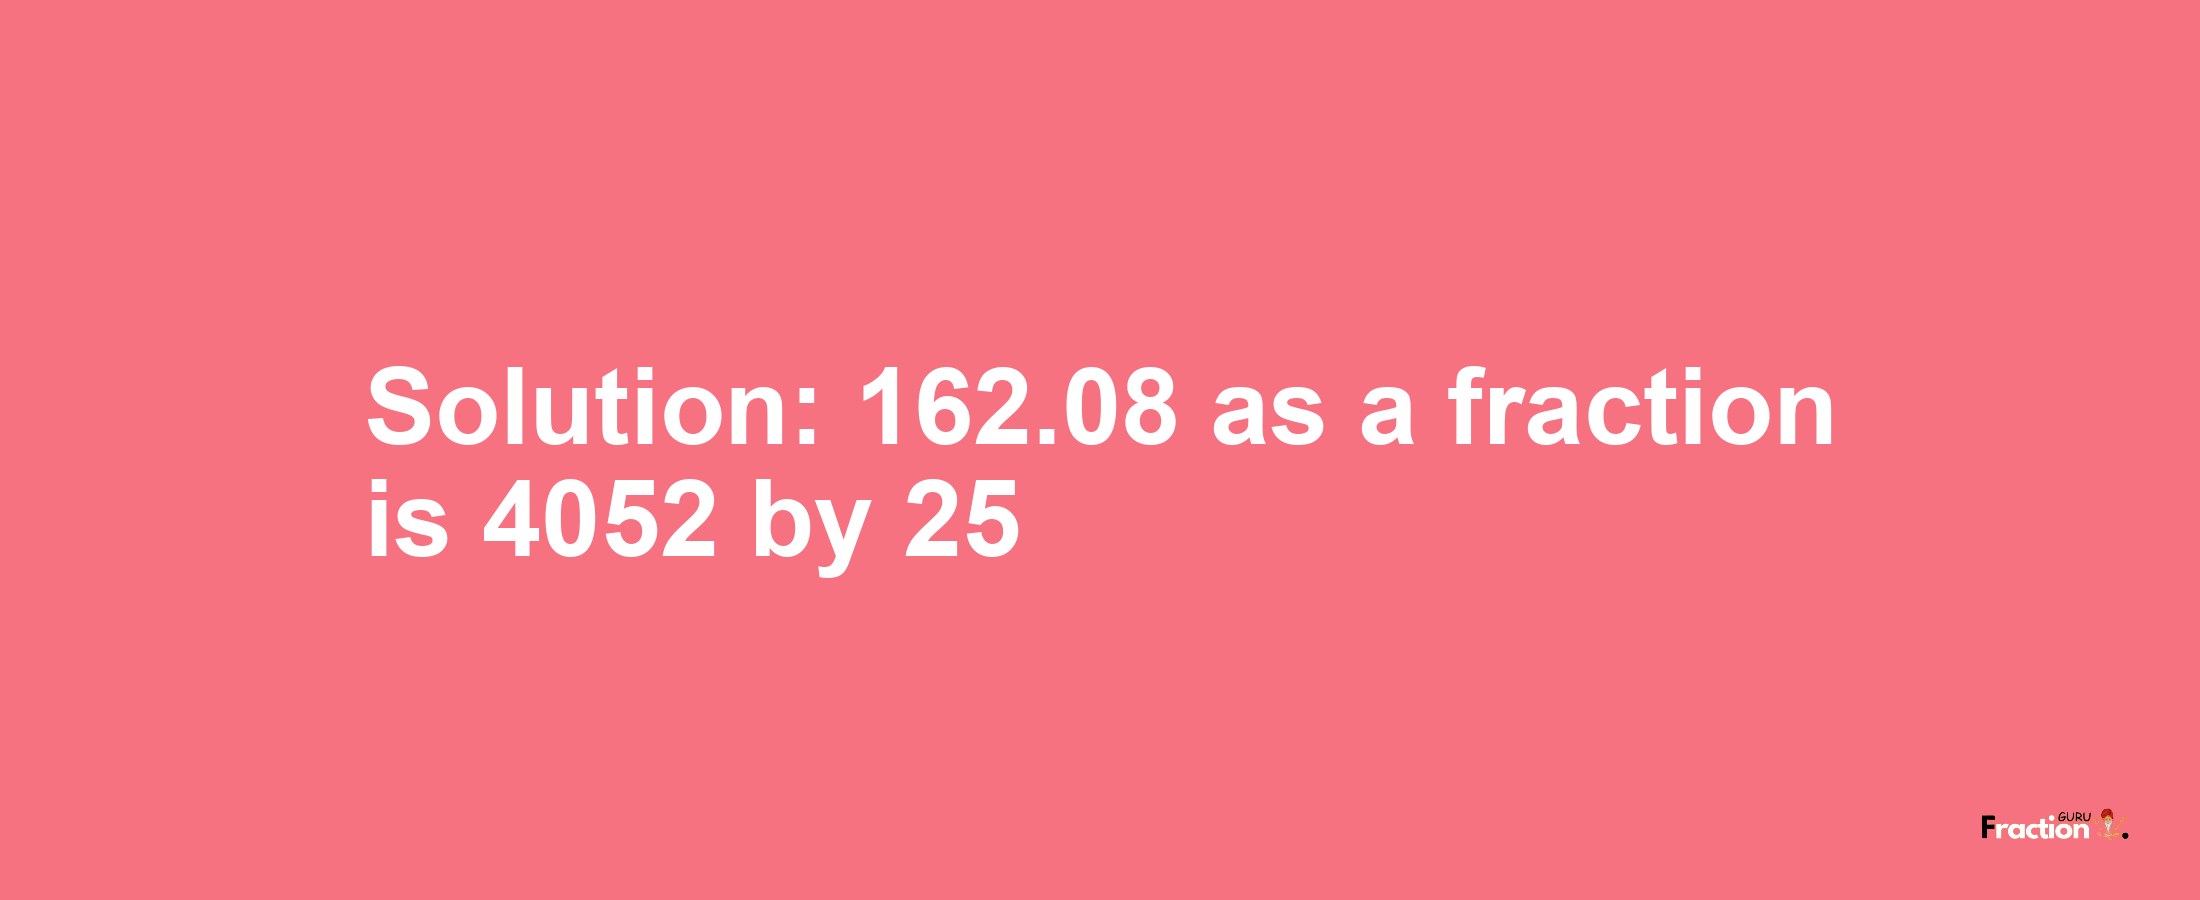 Solution:162.08 as a fraction is 4052/25